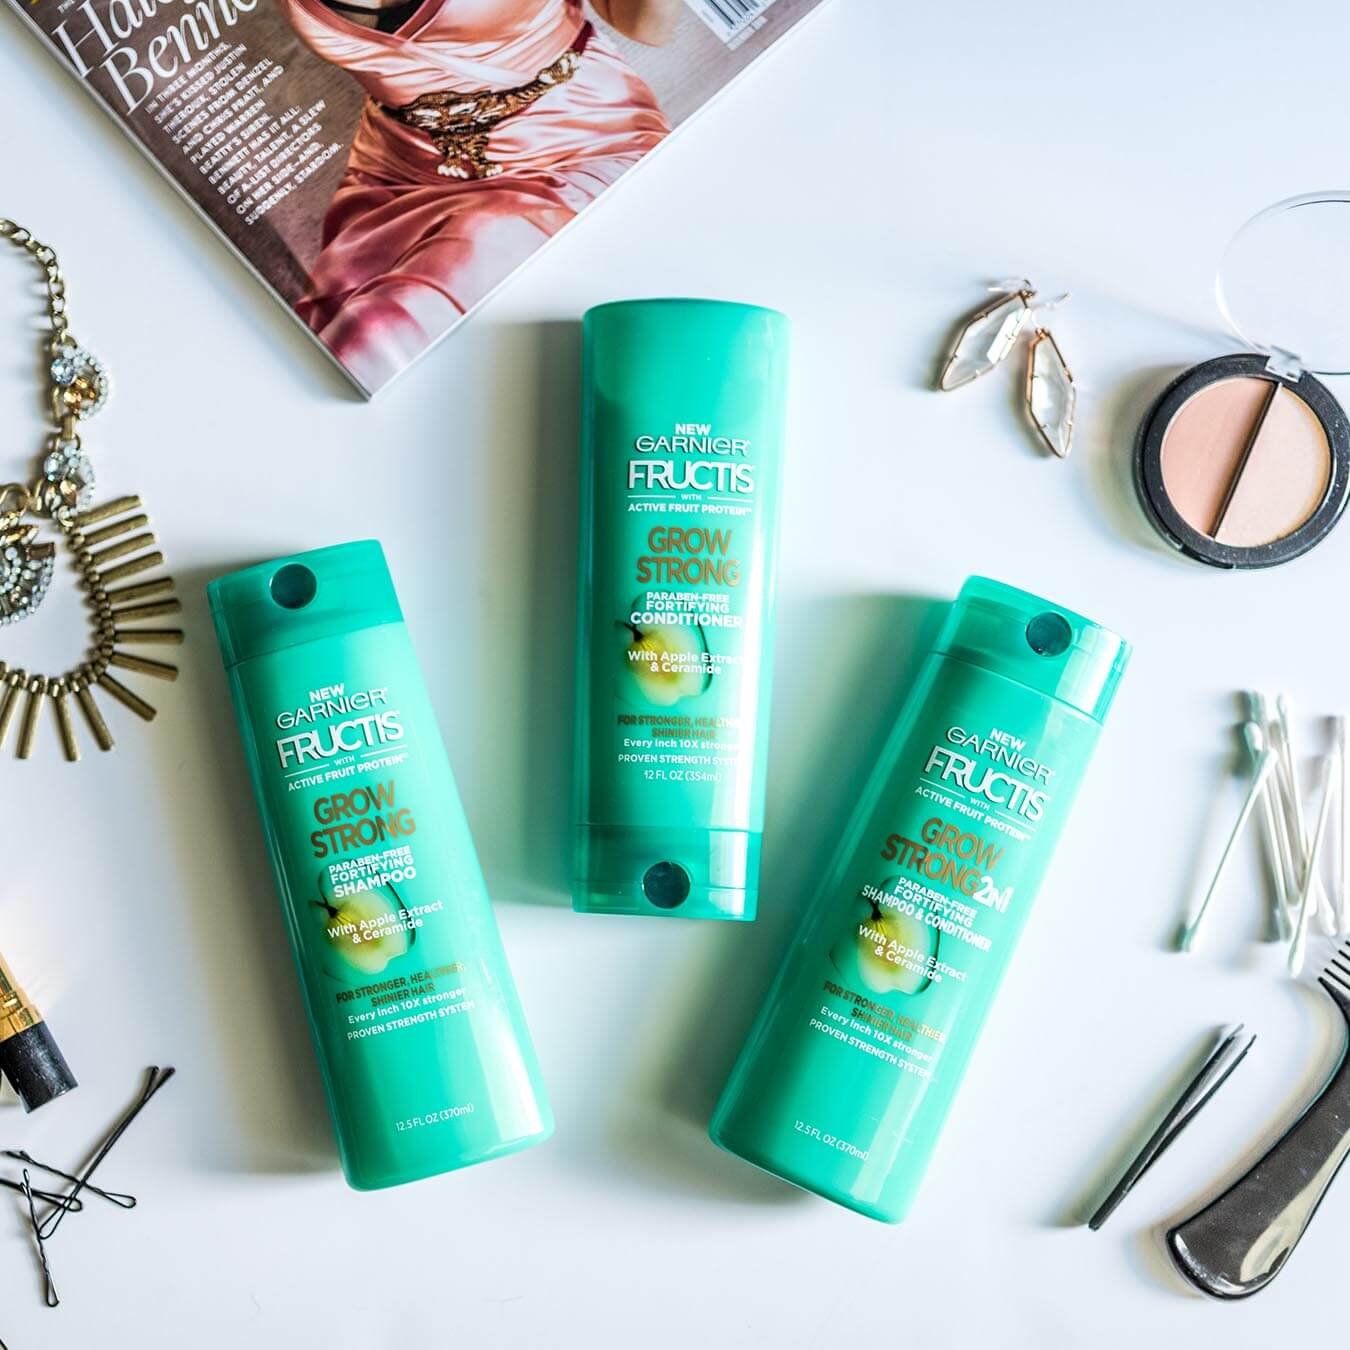 Garnier Fructis Grow Strong Shampoo, Fructis Grow Strong Conditioner, and Fructis Grow Strong 2-in-1 on a blueish-white background next to gold earrings and necklace, bobby pins, tweezers, q-tips, a comb, and two shades of blush.